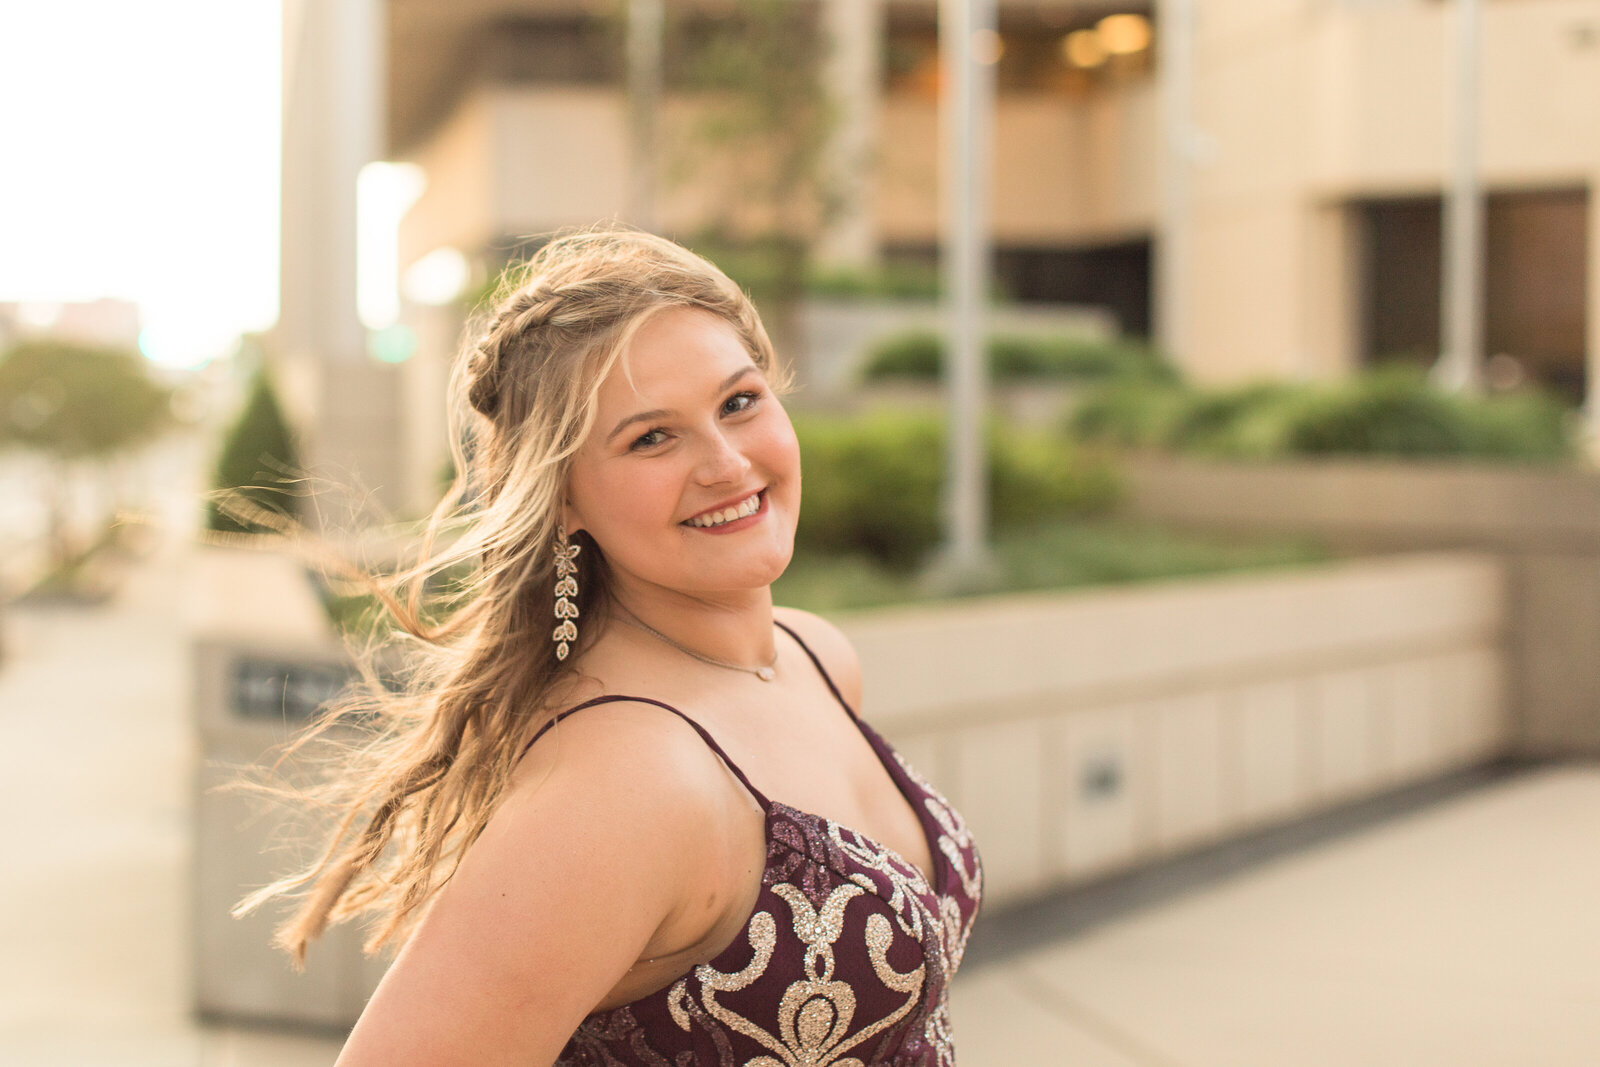 senior girl in prom dress downtown area